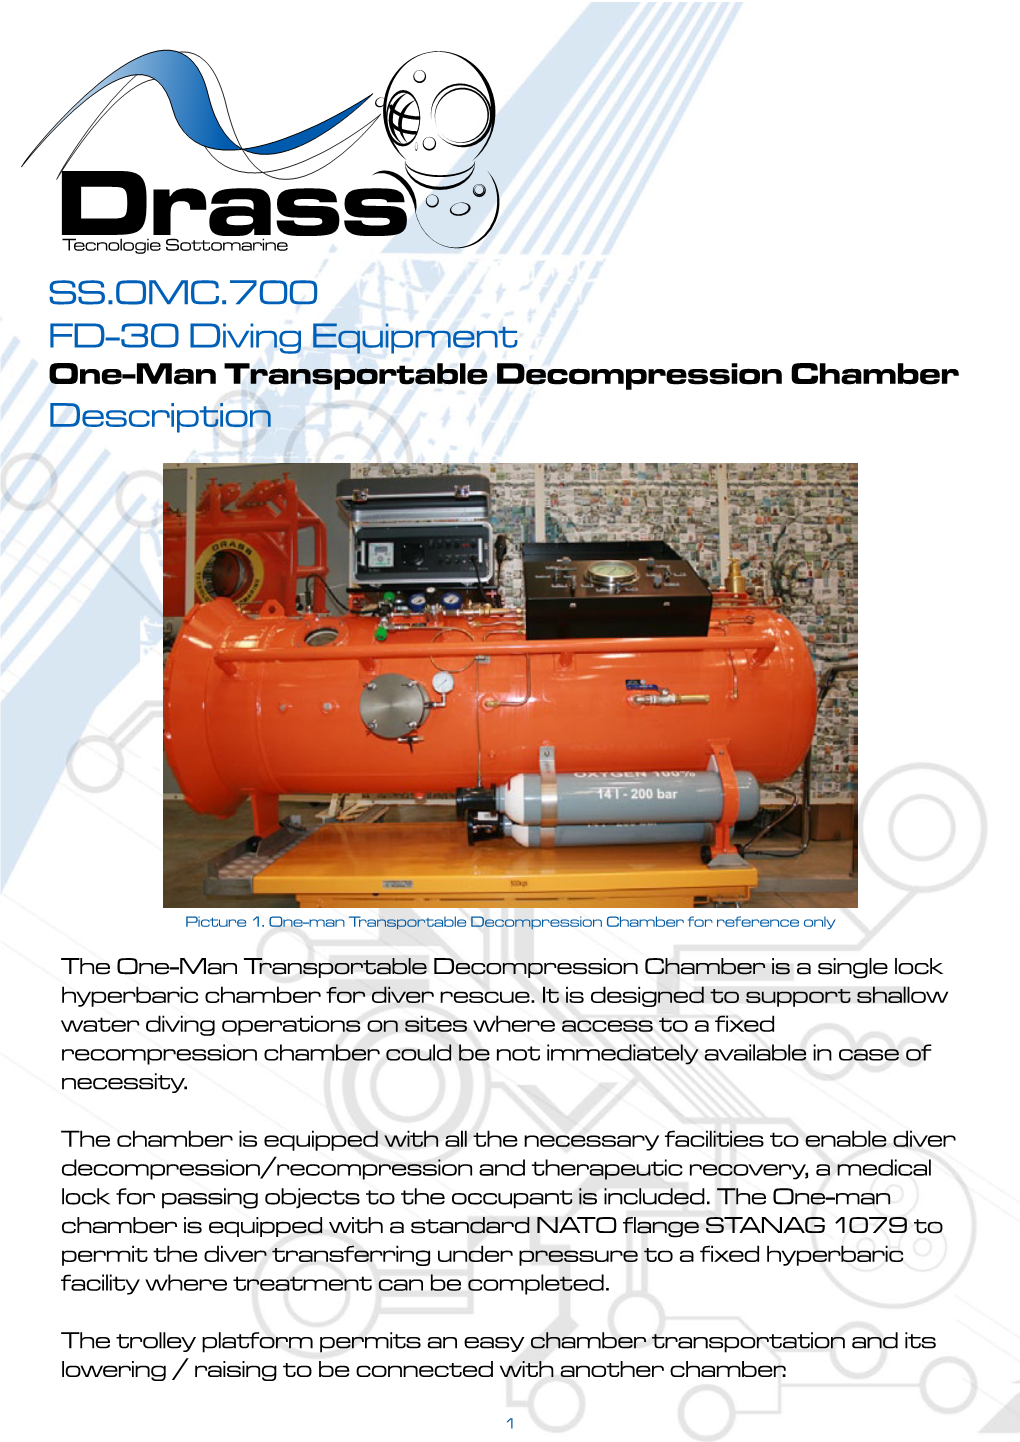 SS.OMC.700 One-Man Transportable Chamber